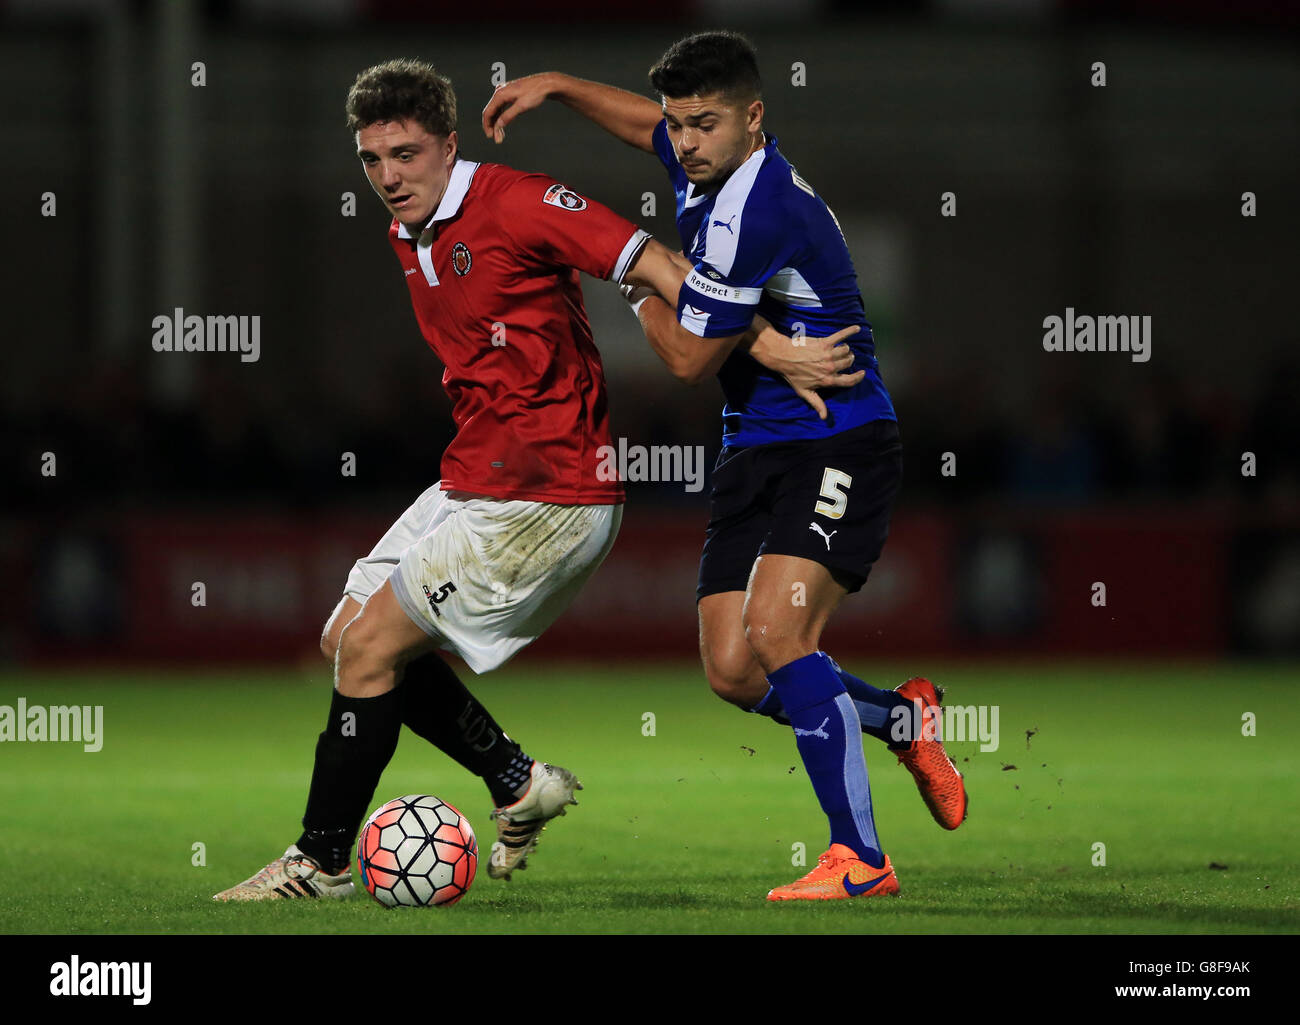 FC United of Manchester's Chris Lynch (left) battles for the ball with Chesterfield's Sam Morsy during the Emirates FA Cup, First Round match at Broadhurst Park, Manchester. Stock Photo